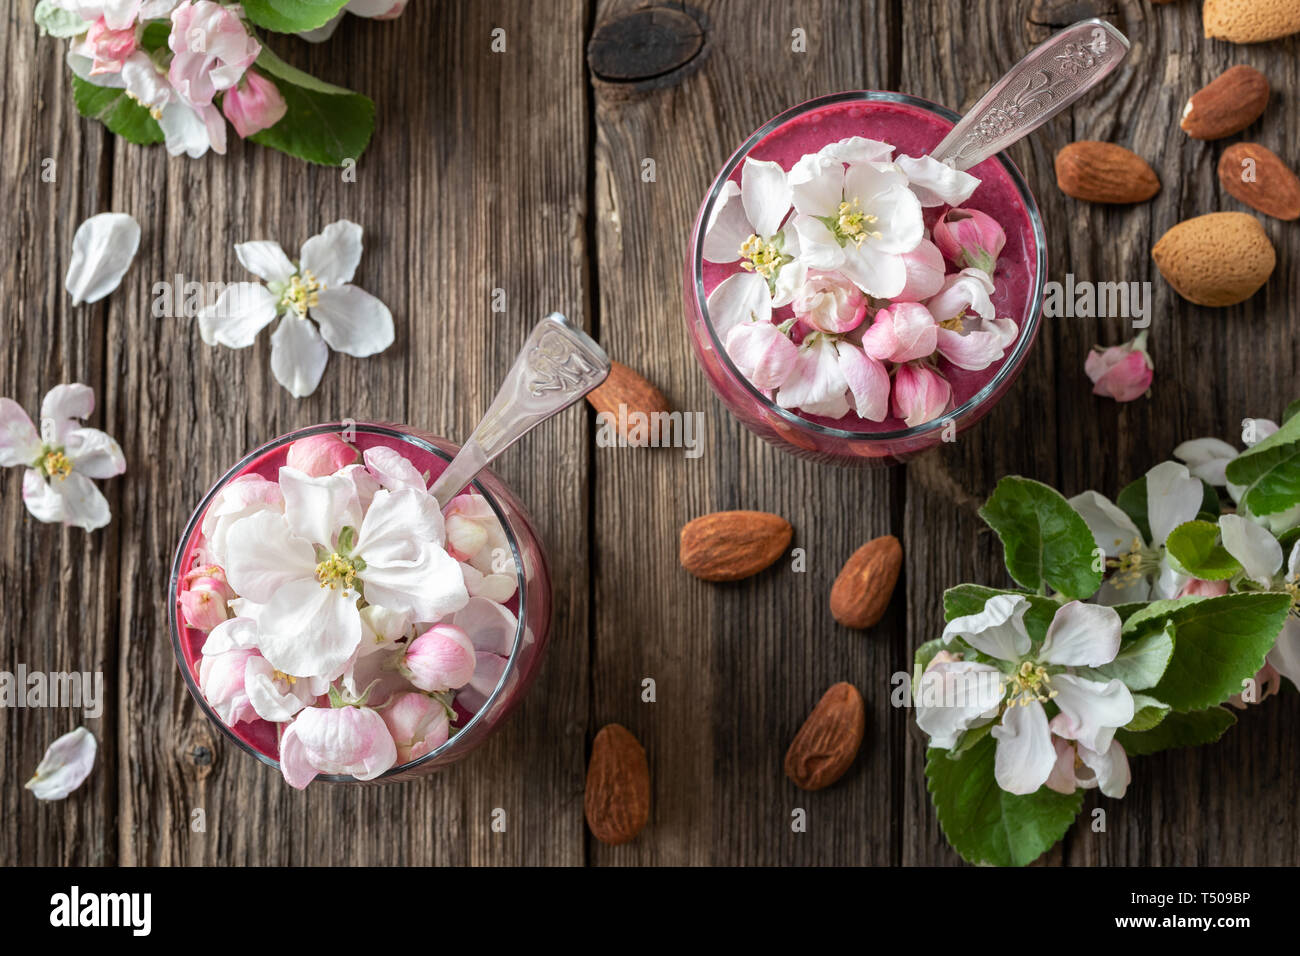 Chia pudding with almond milk, yogurt, blueberries and apple blossoms, top view Stock Photo